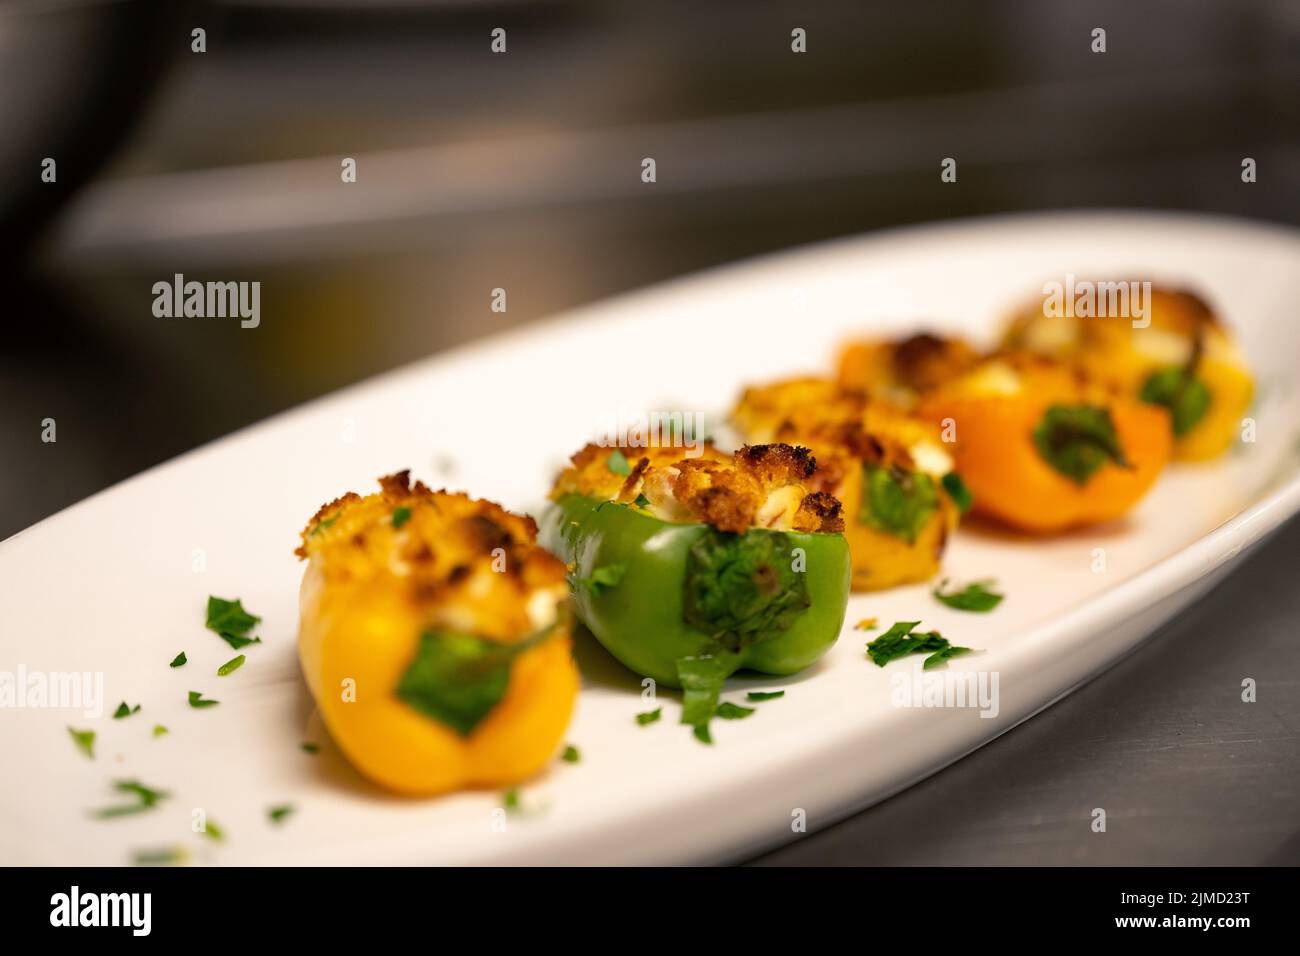 Macro image of stuffed mini peppers lined up on an oval plate with parsley for garnish Stock Photo